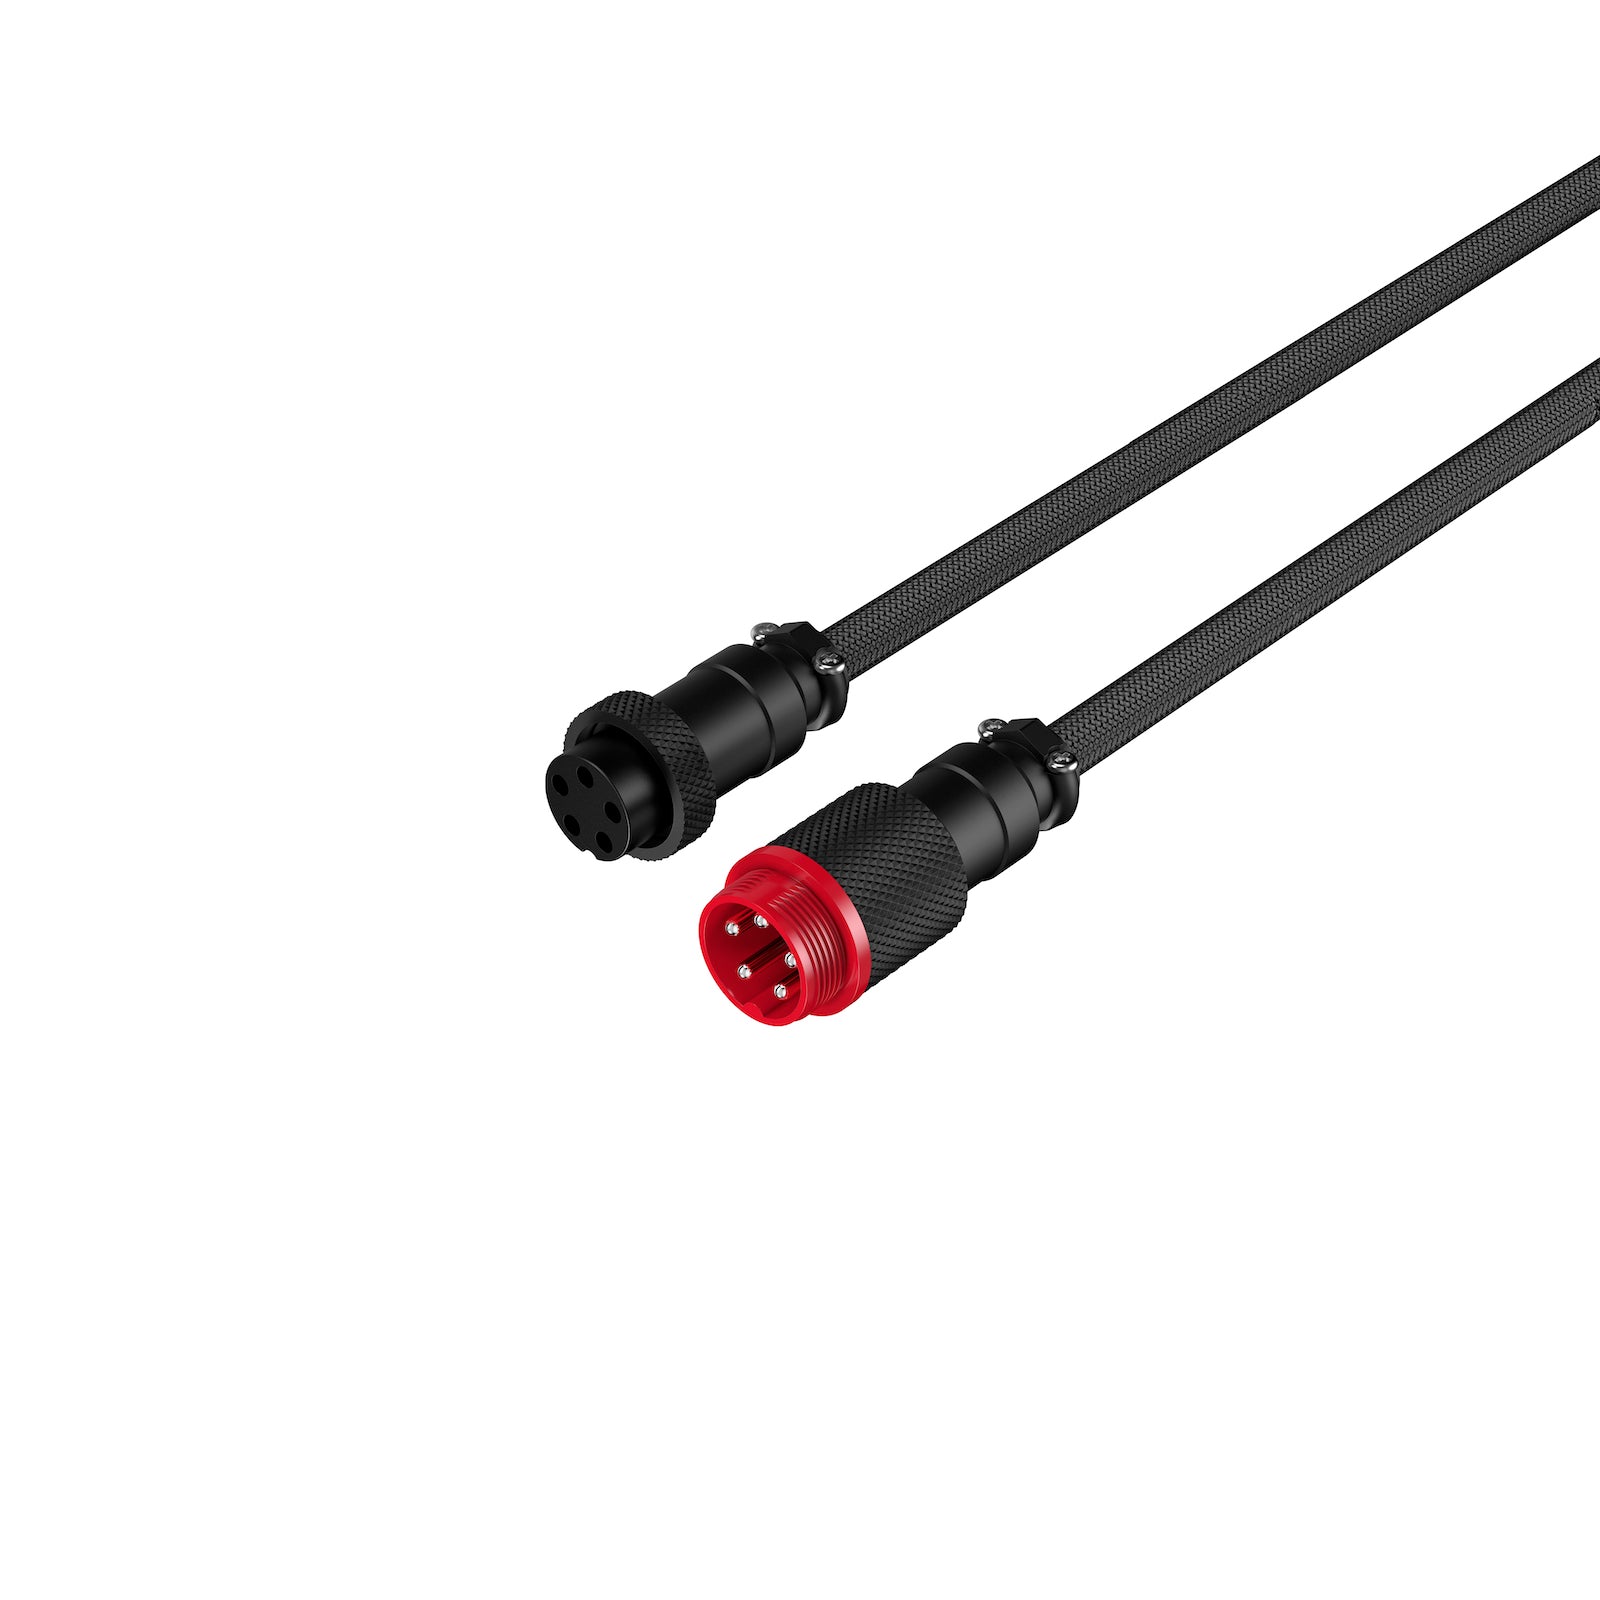 HyperX USB-C Coiled Cable